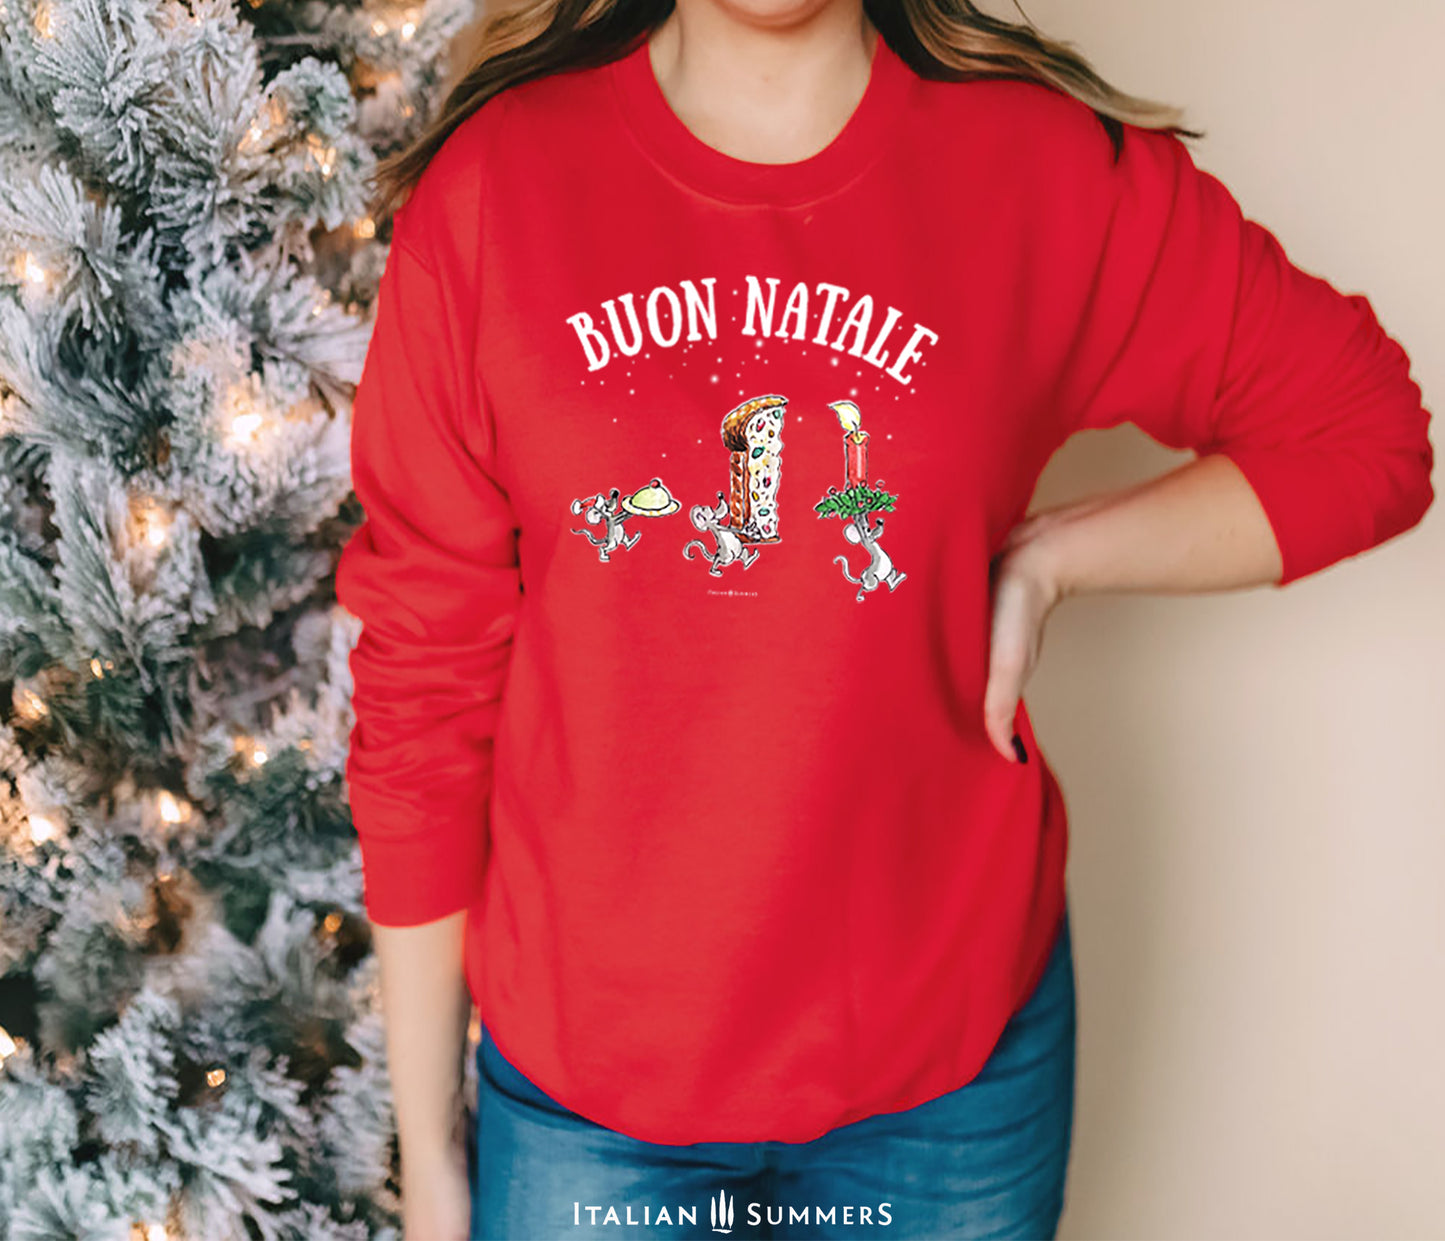 An Italy-inspired Christmas sweatshirt! Three Merry Italian Mice prance back to their cubby-hole to enjoy a Sicilian Cassatina and a slice of Panettone. This happy Italy-inspired Christmas sweatshirt is cozy and soft.